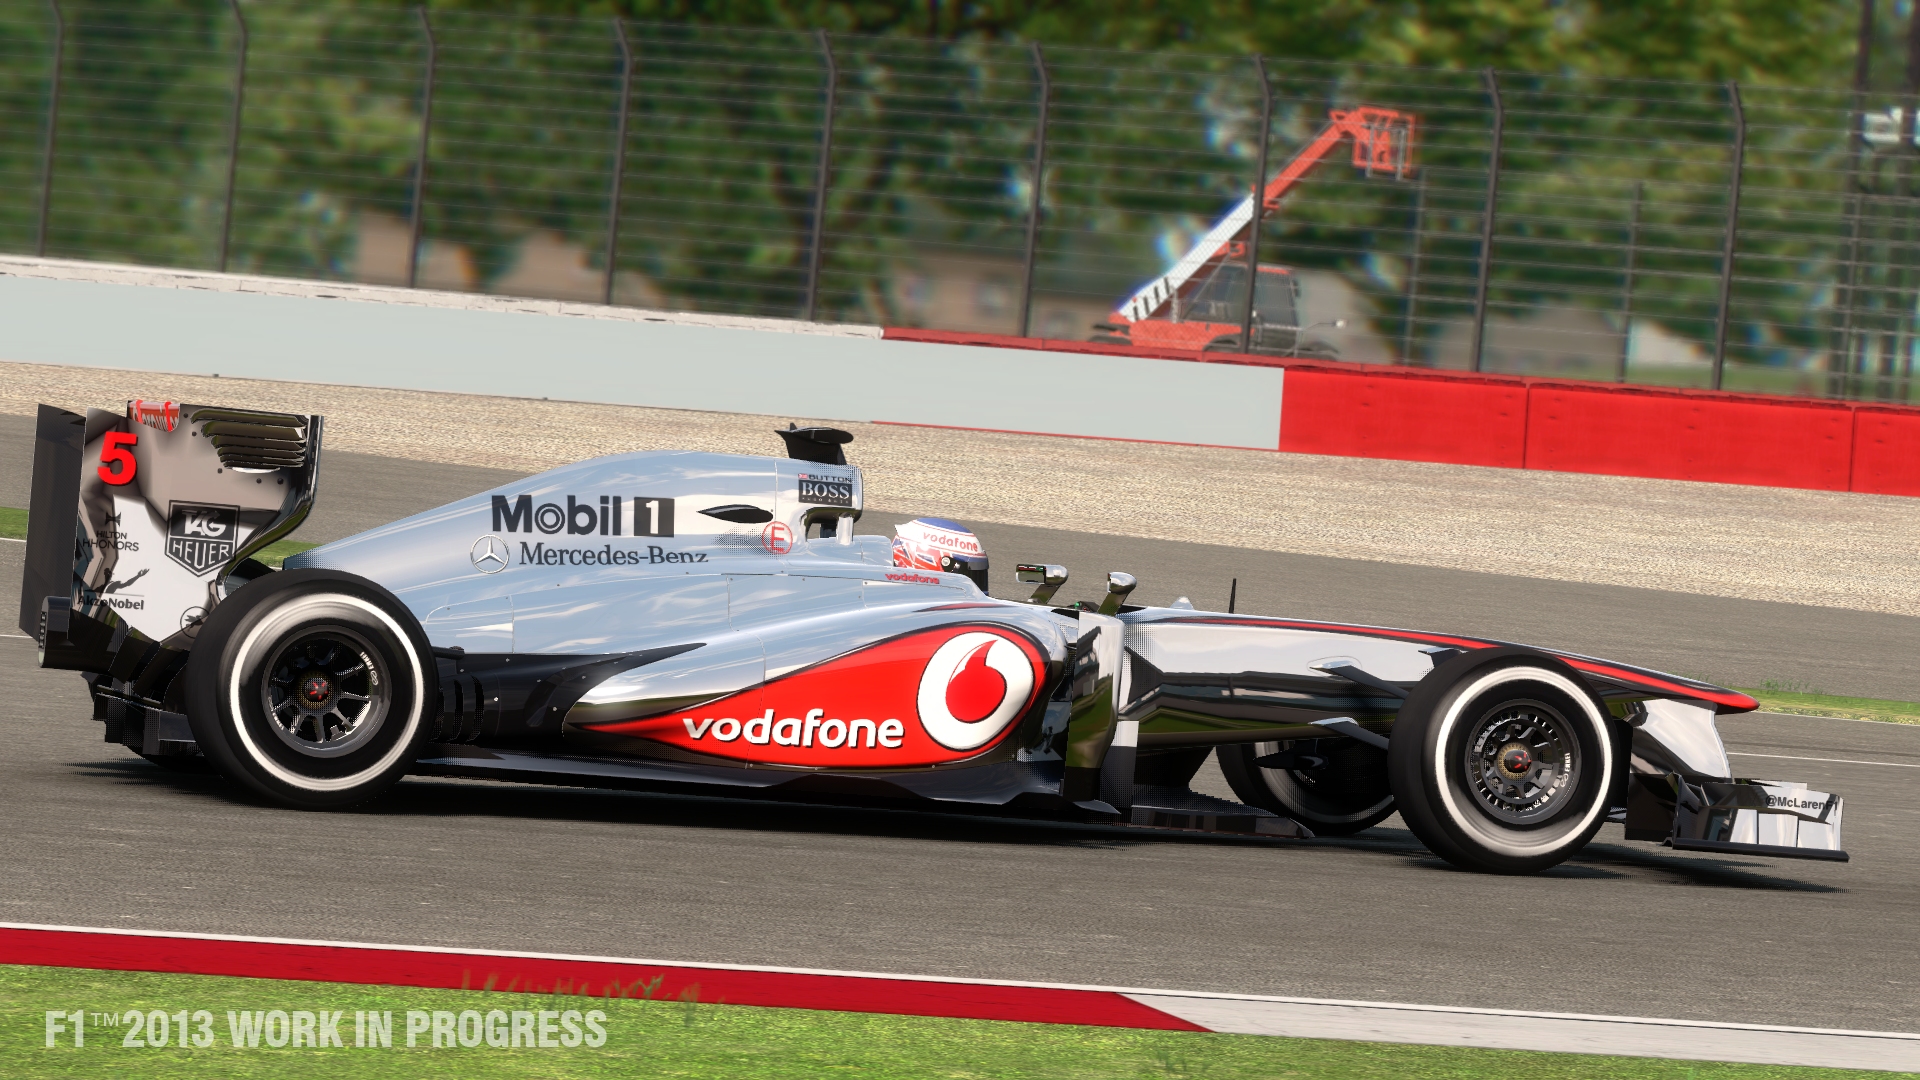 f1-2013-game-delicious-screenshots-released-photo-gallery-1080p-9.jpg